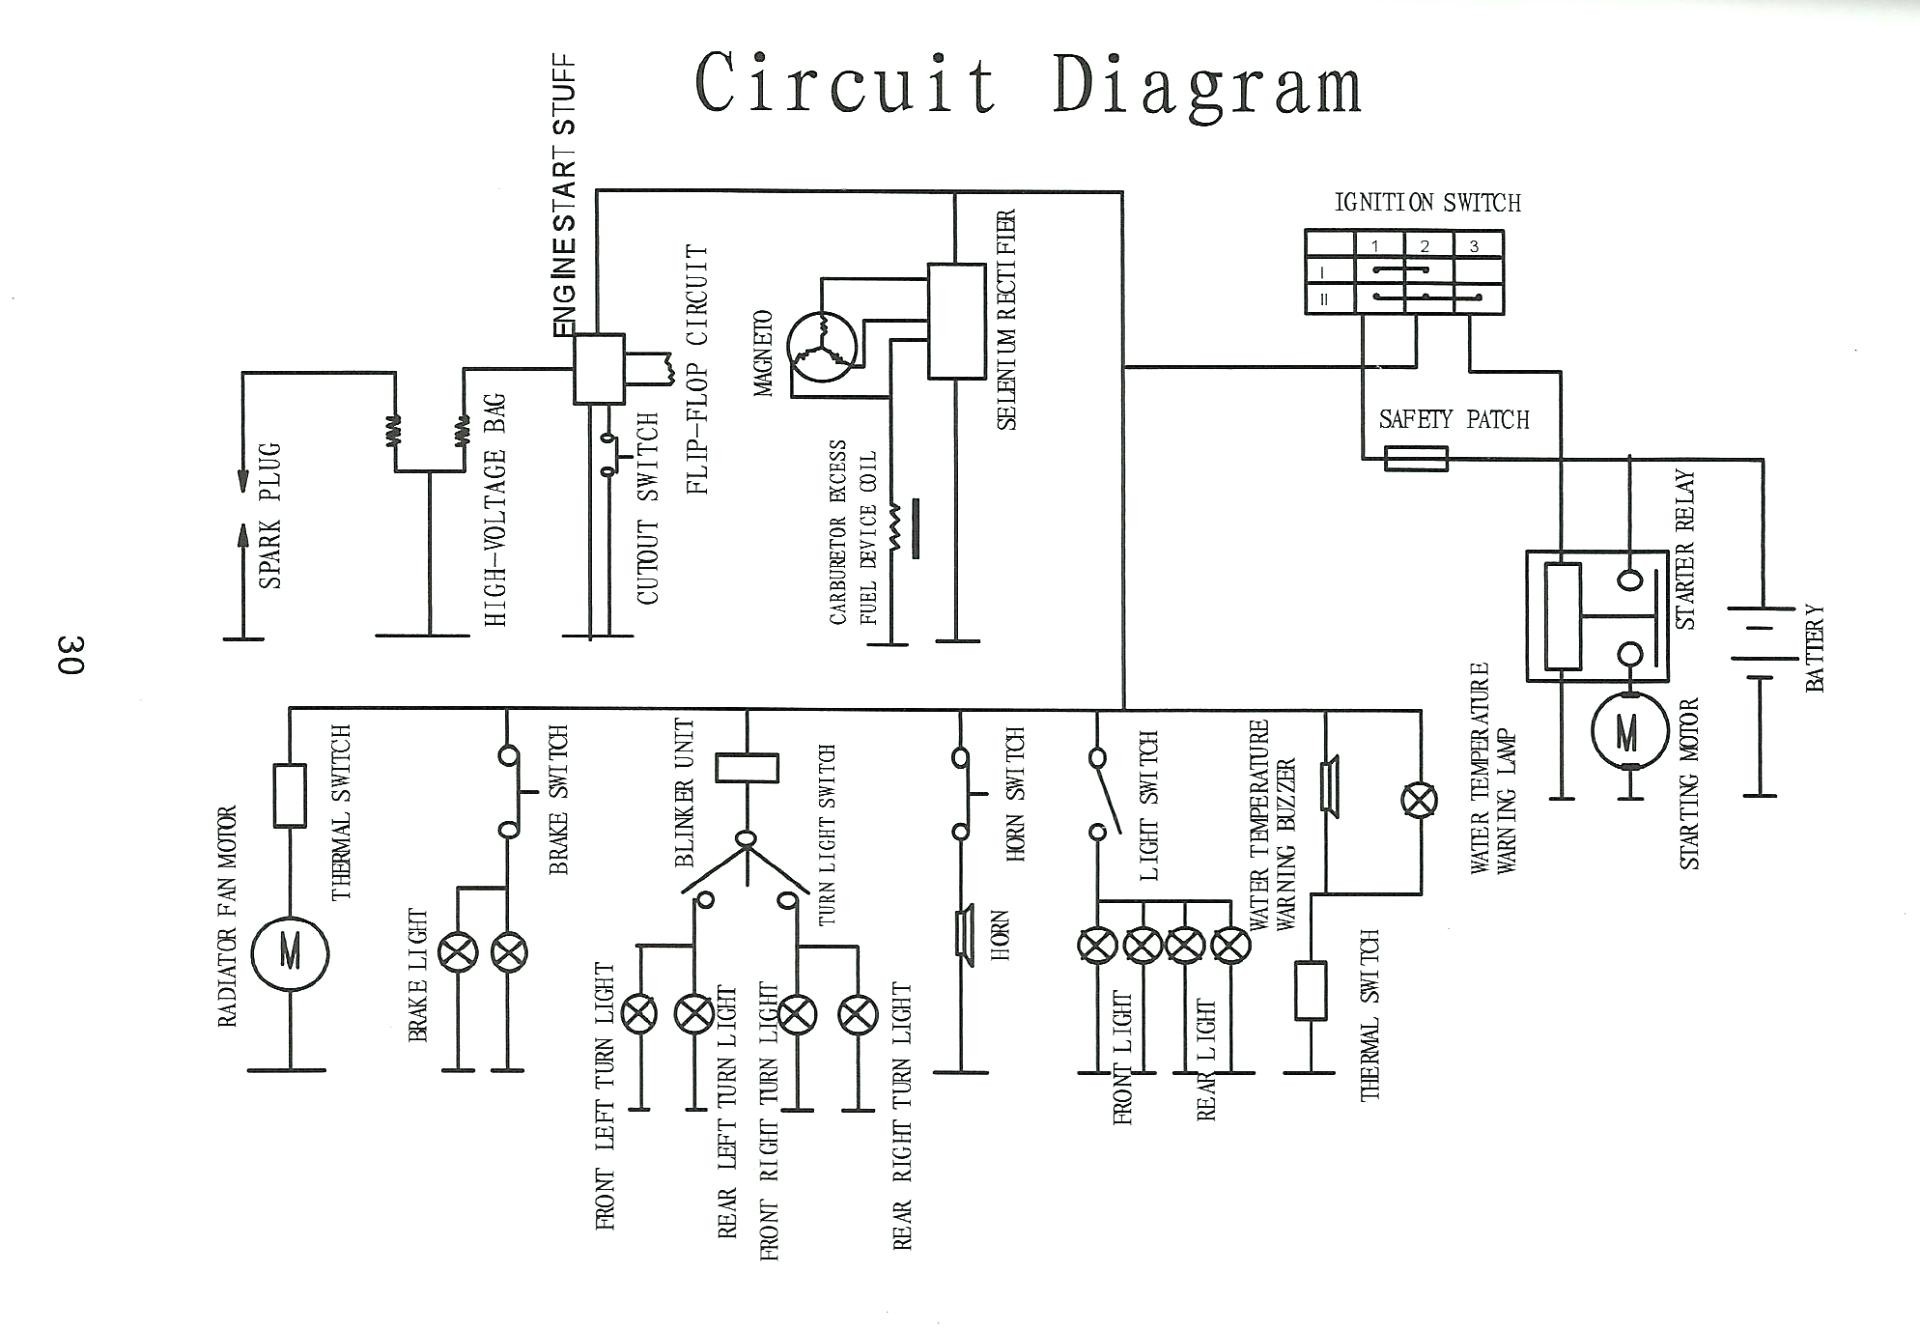 moped engine diagram lovely scooter cdi wiring diagram moped of scooter ignition switch wiring diagram